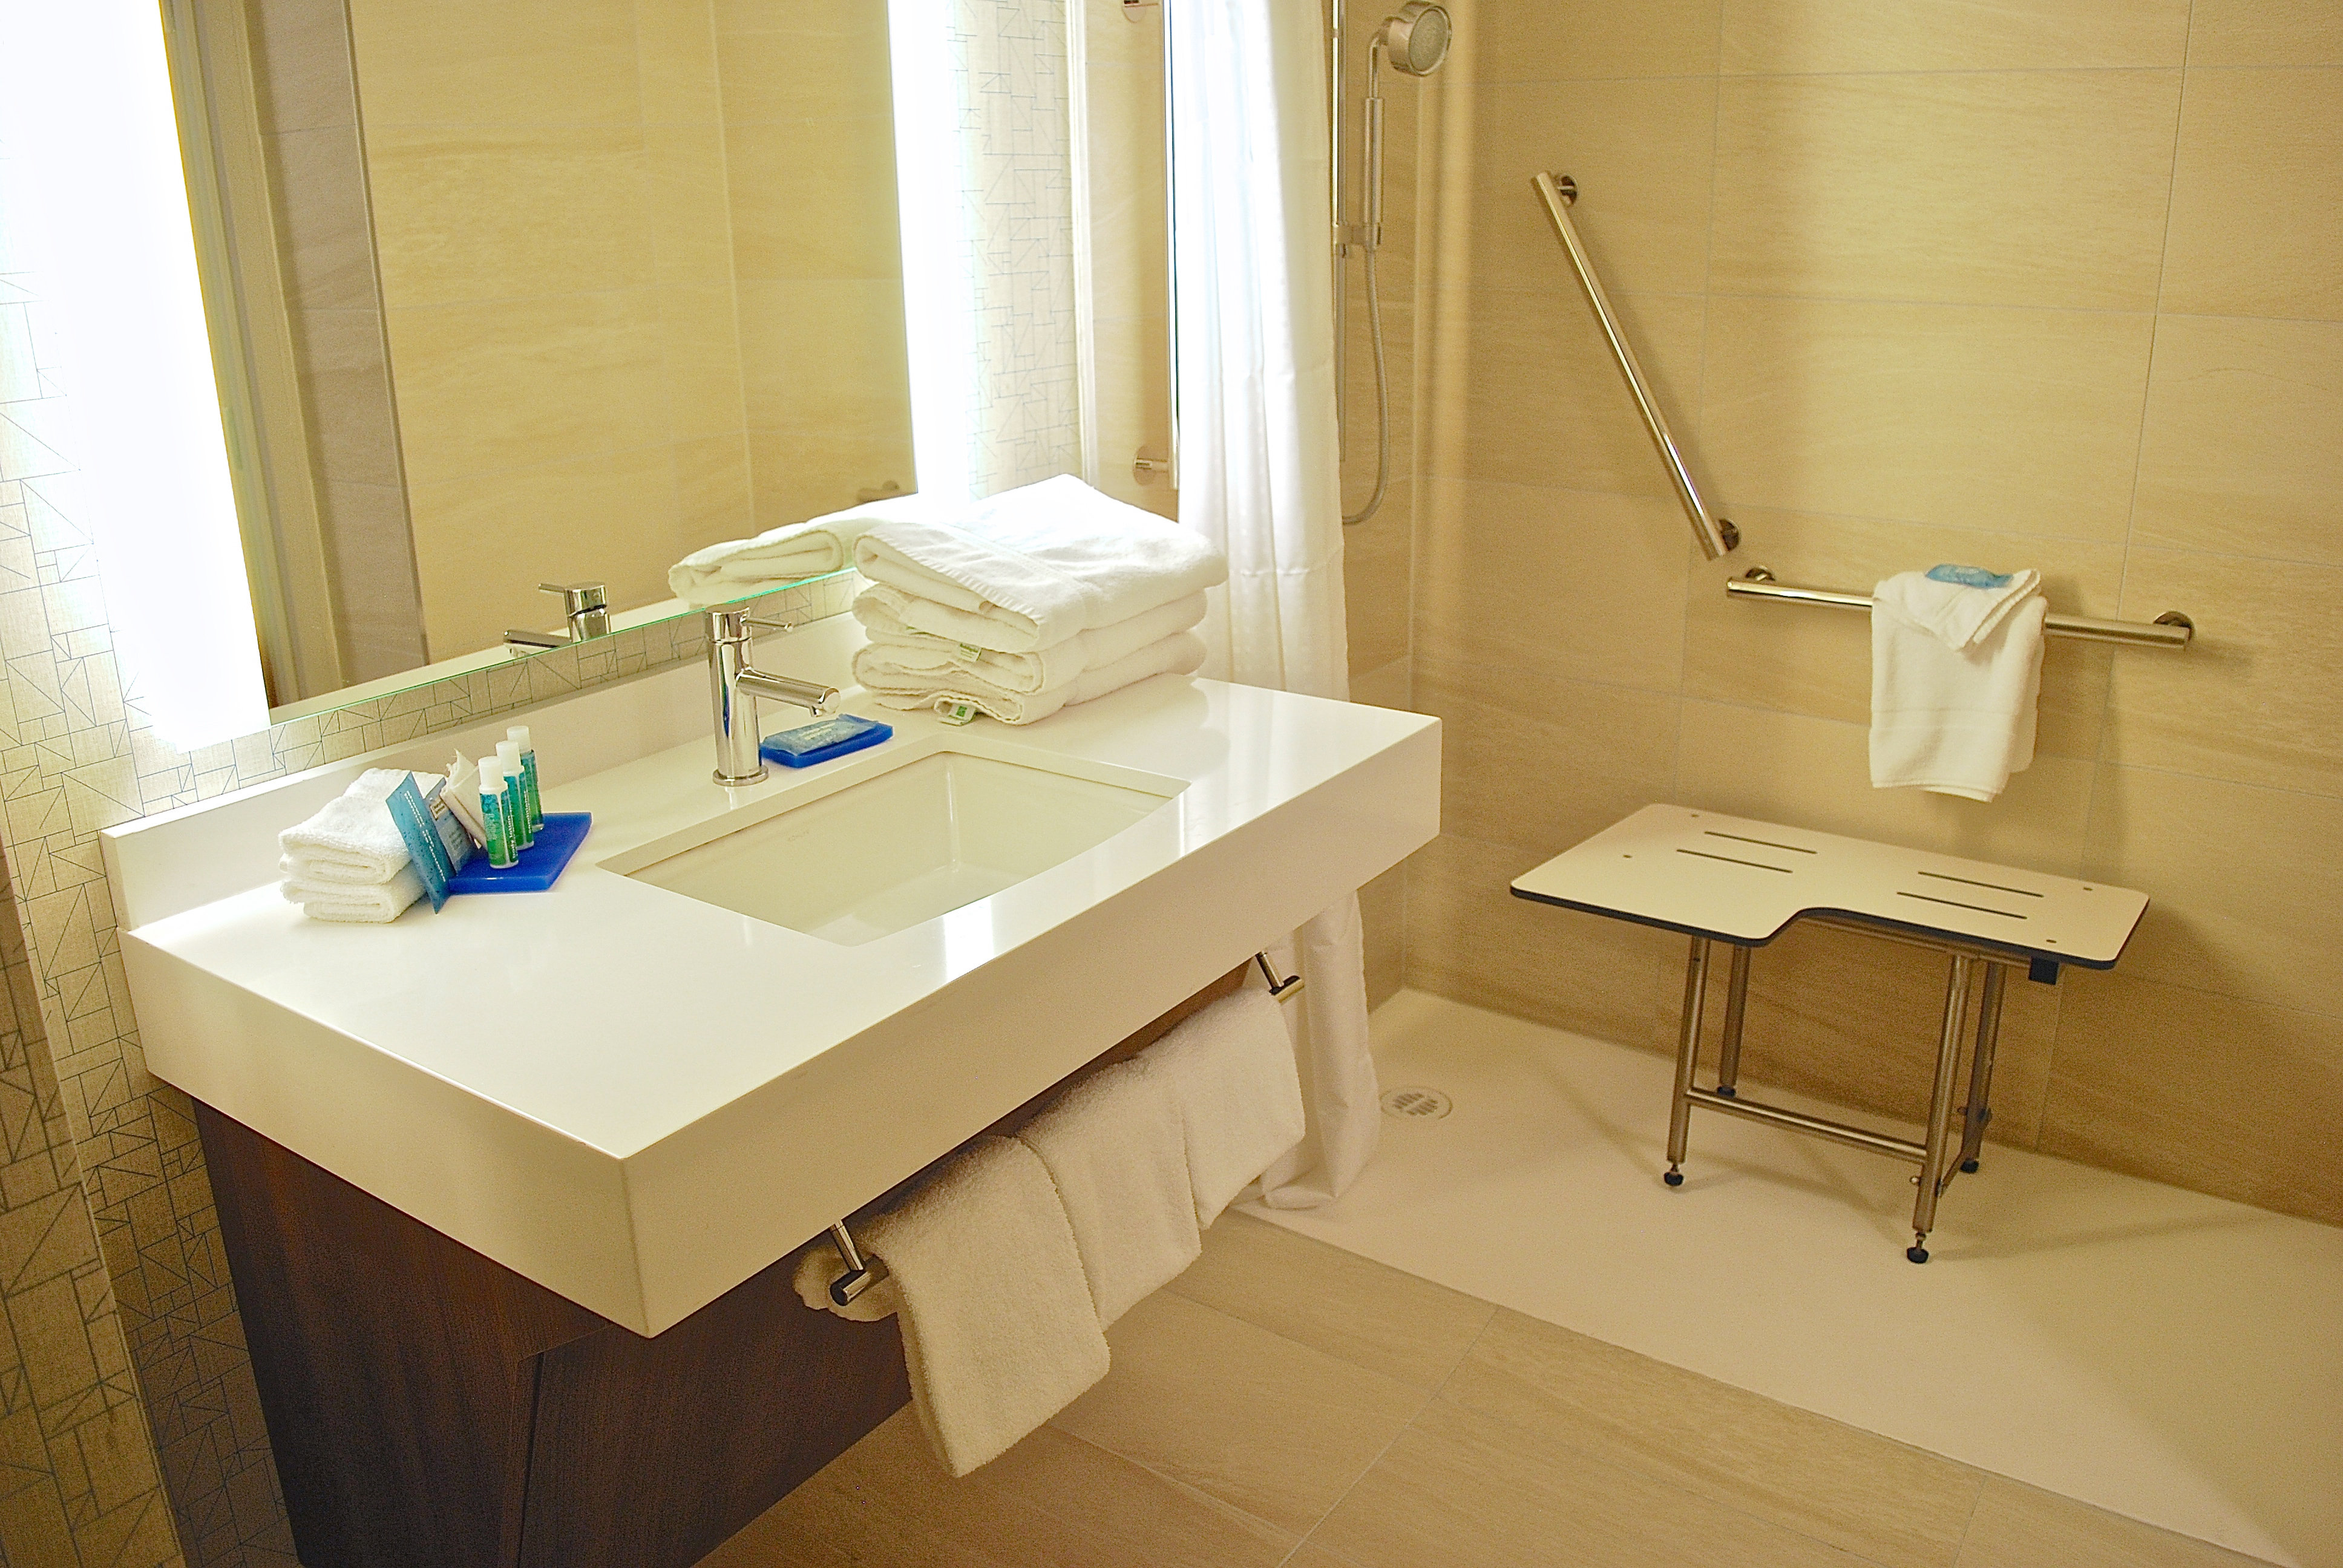 Get ready in our spacious guest bathroom with ADA roll-in shower.